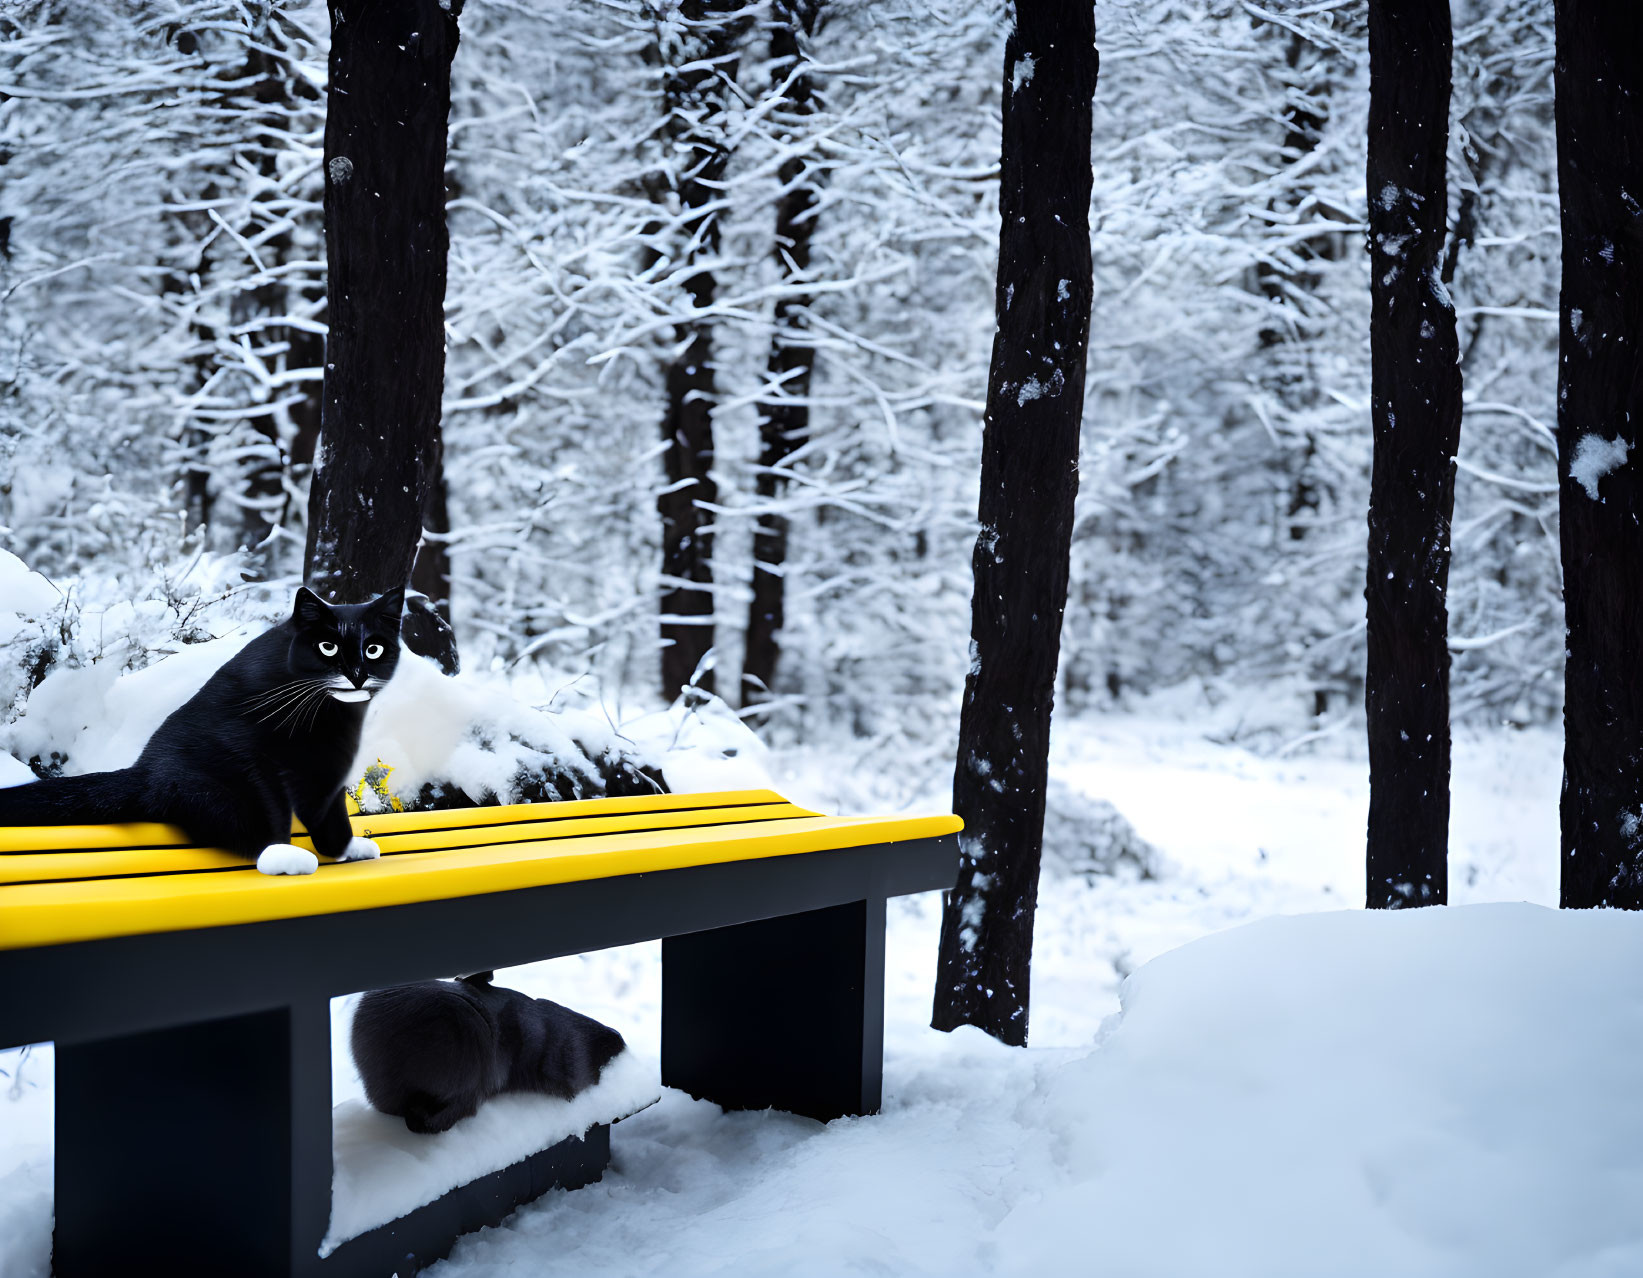 Black Cat with White Markings on Yellow Bench in Snowy Forest